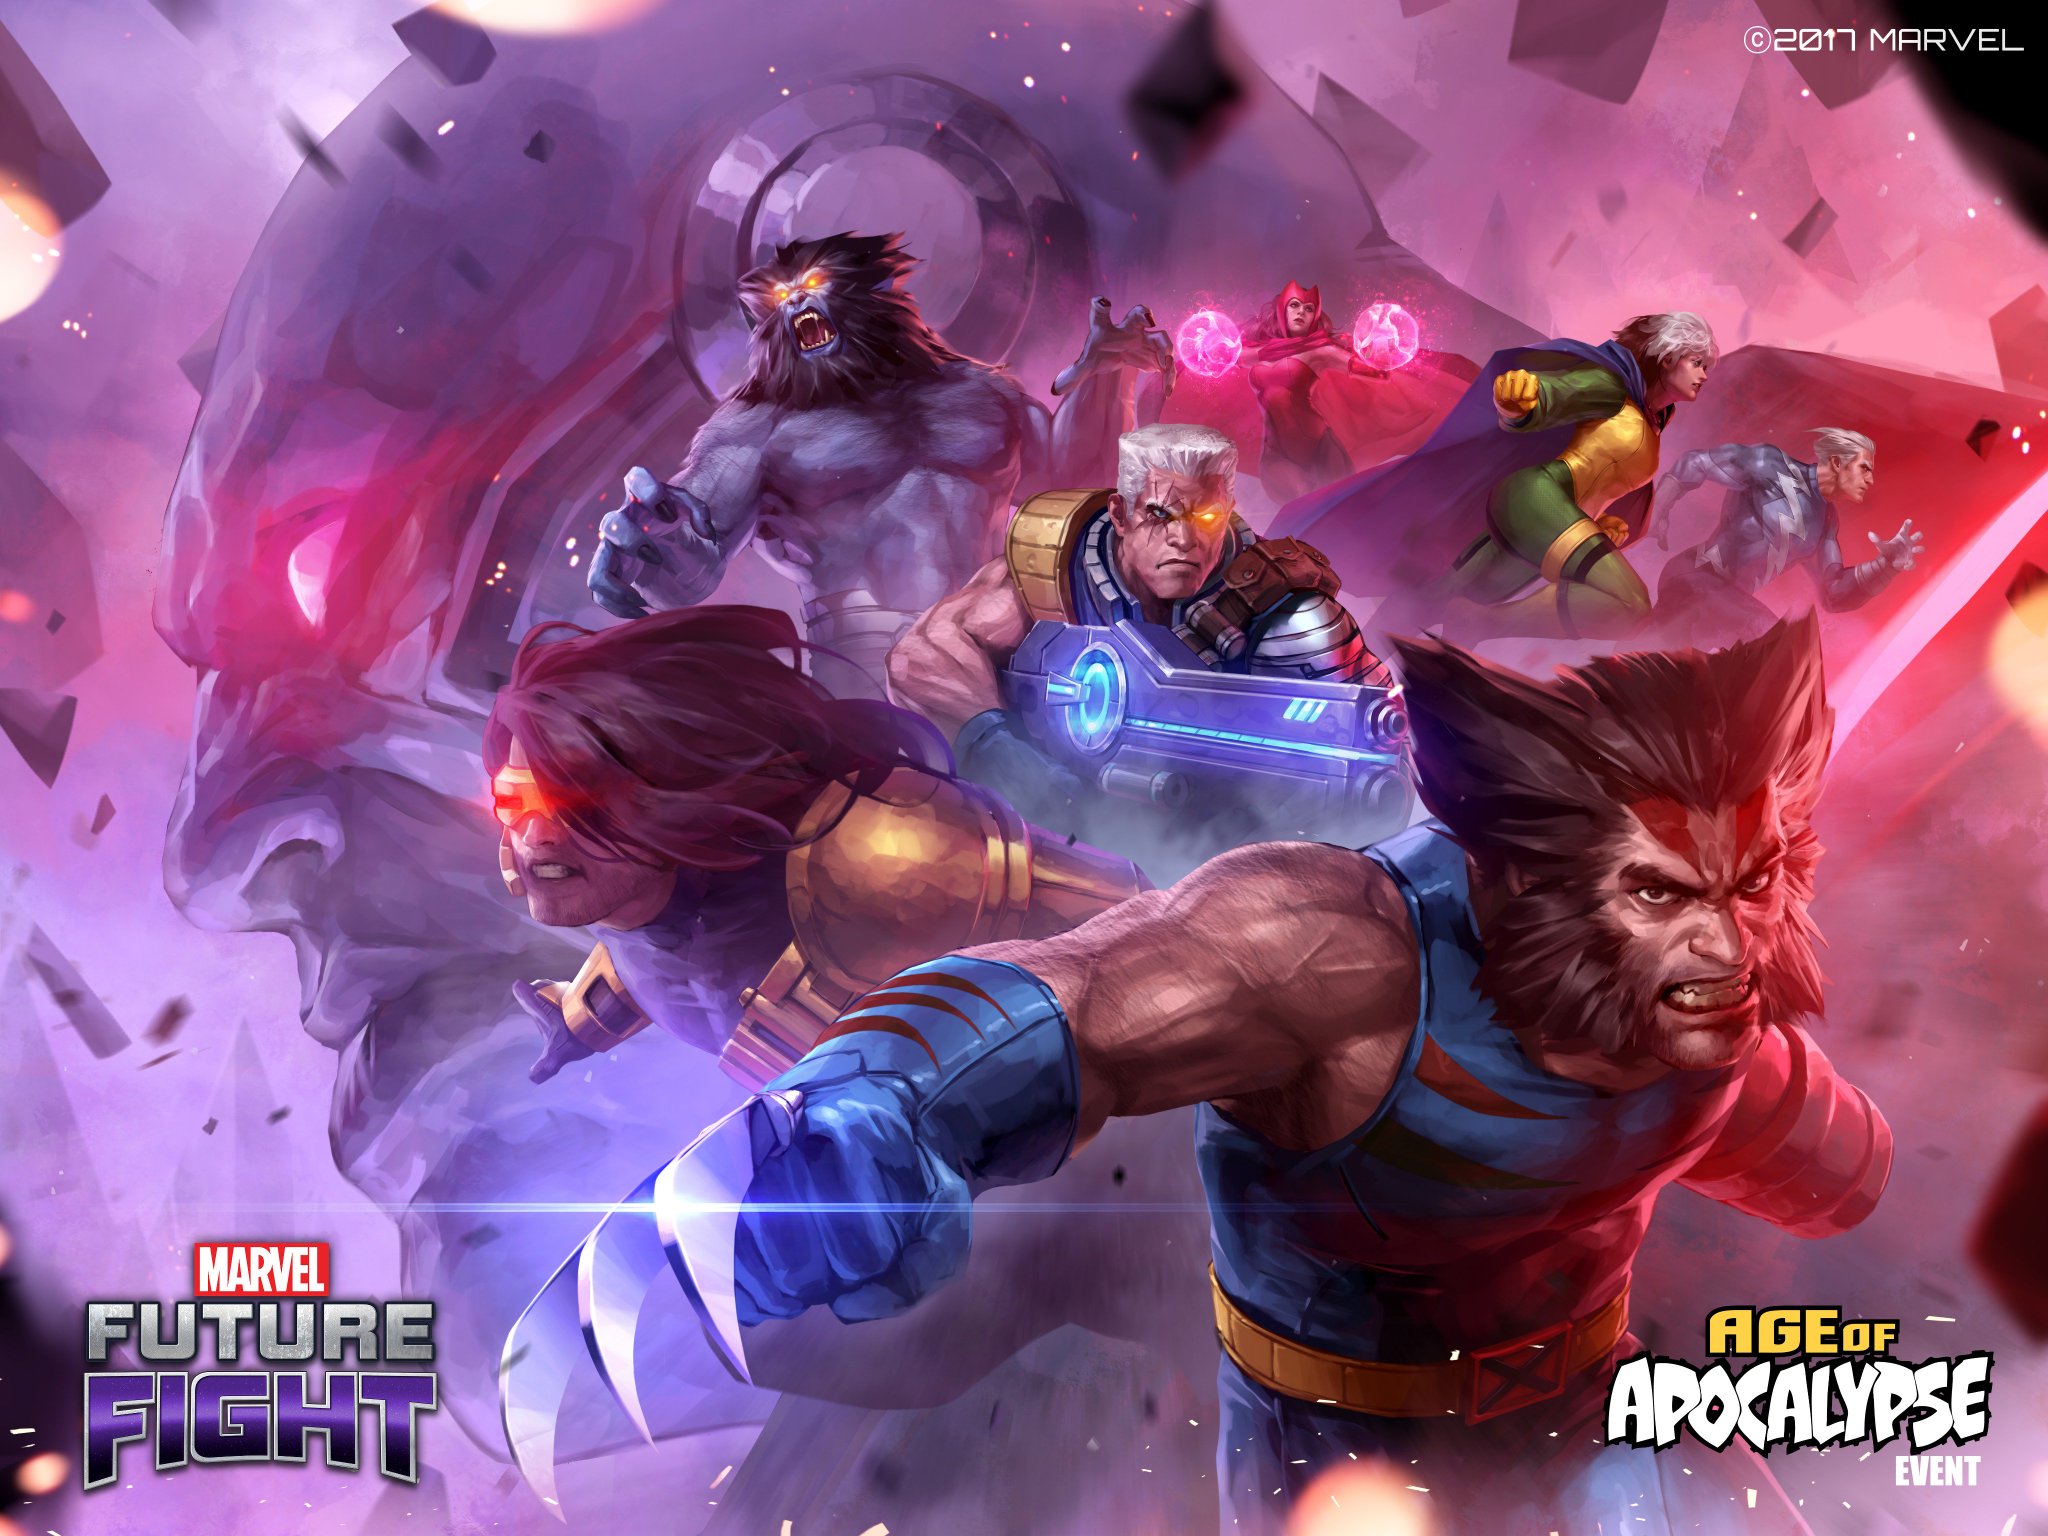 &#91;iOS/Android&#93; Marvel Future Fight Official Thread - Part 2 &#91;REBORN&#93;